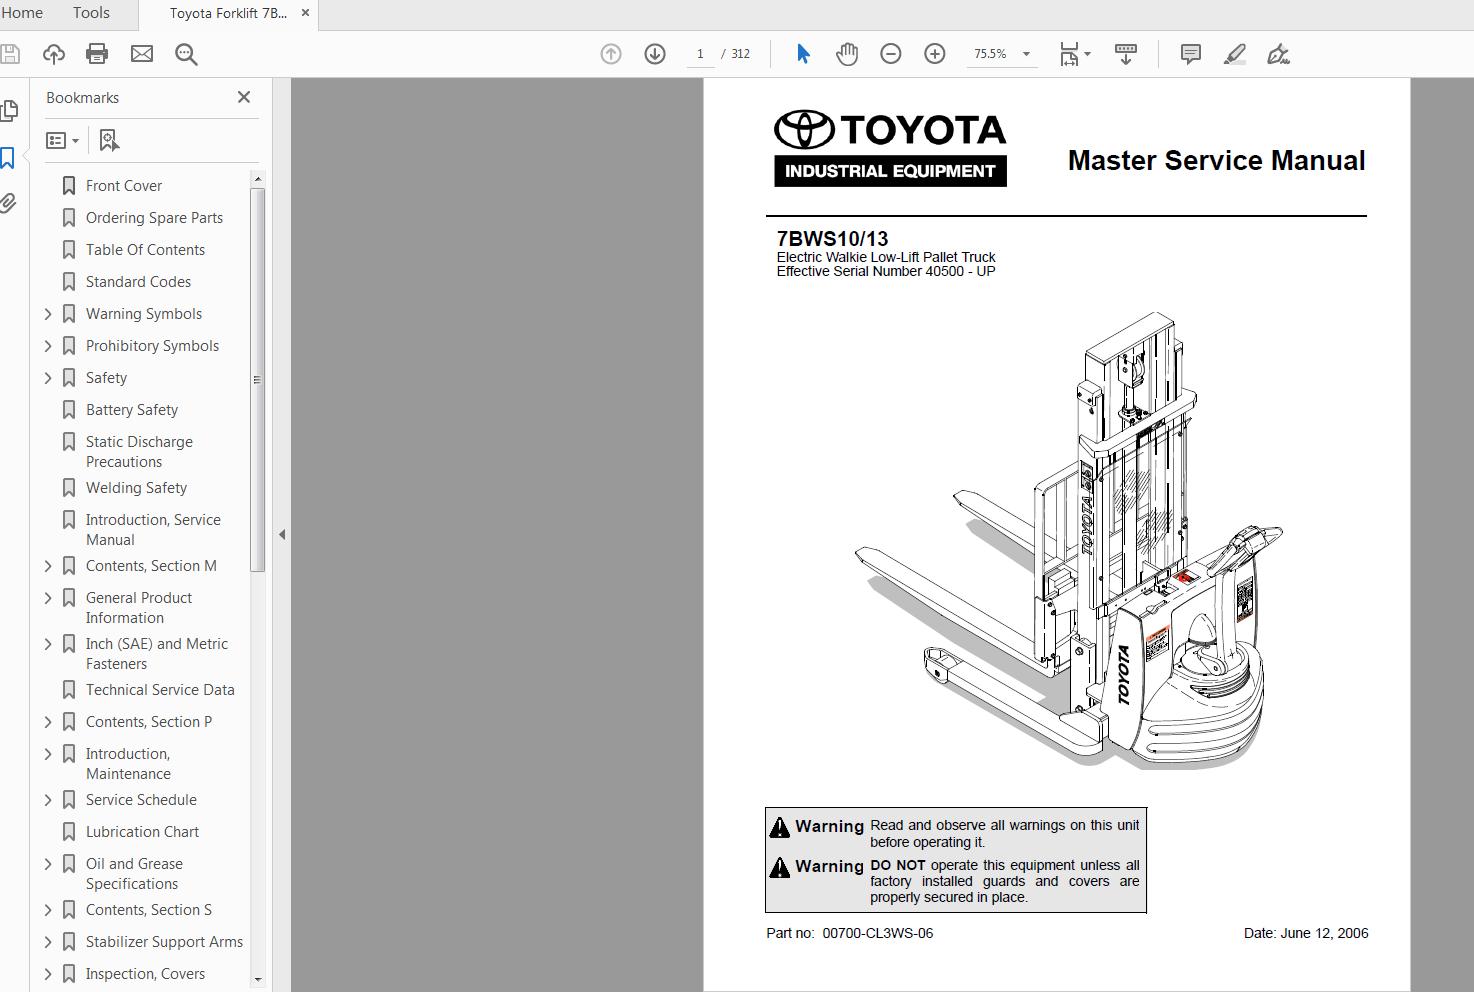 Toyota Forklift 7bws10 13 Sn 40500 And Up Master Service Manual Cl3ws 06 Auto Repair Manual Forum Heavy Equipment Forums Download Repair Workshop Manual